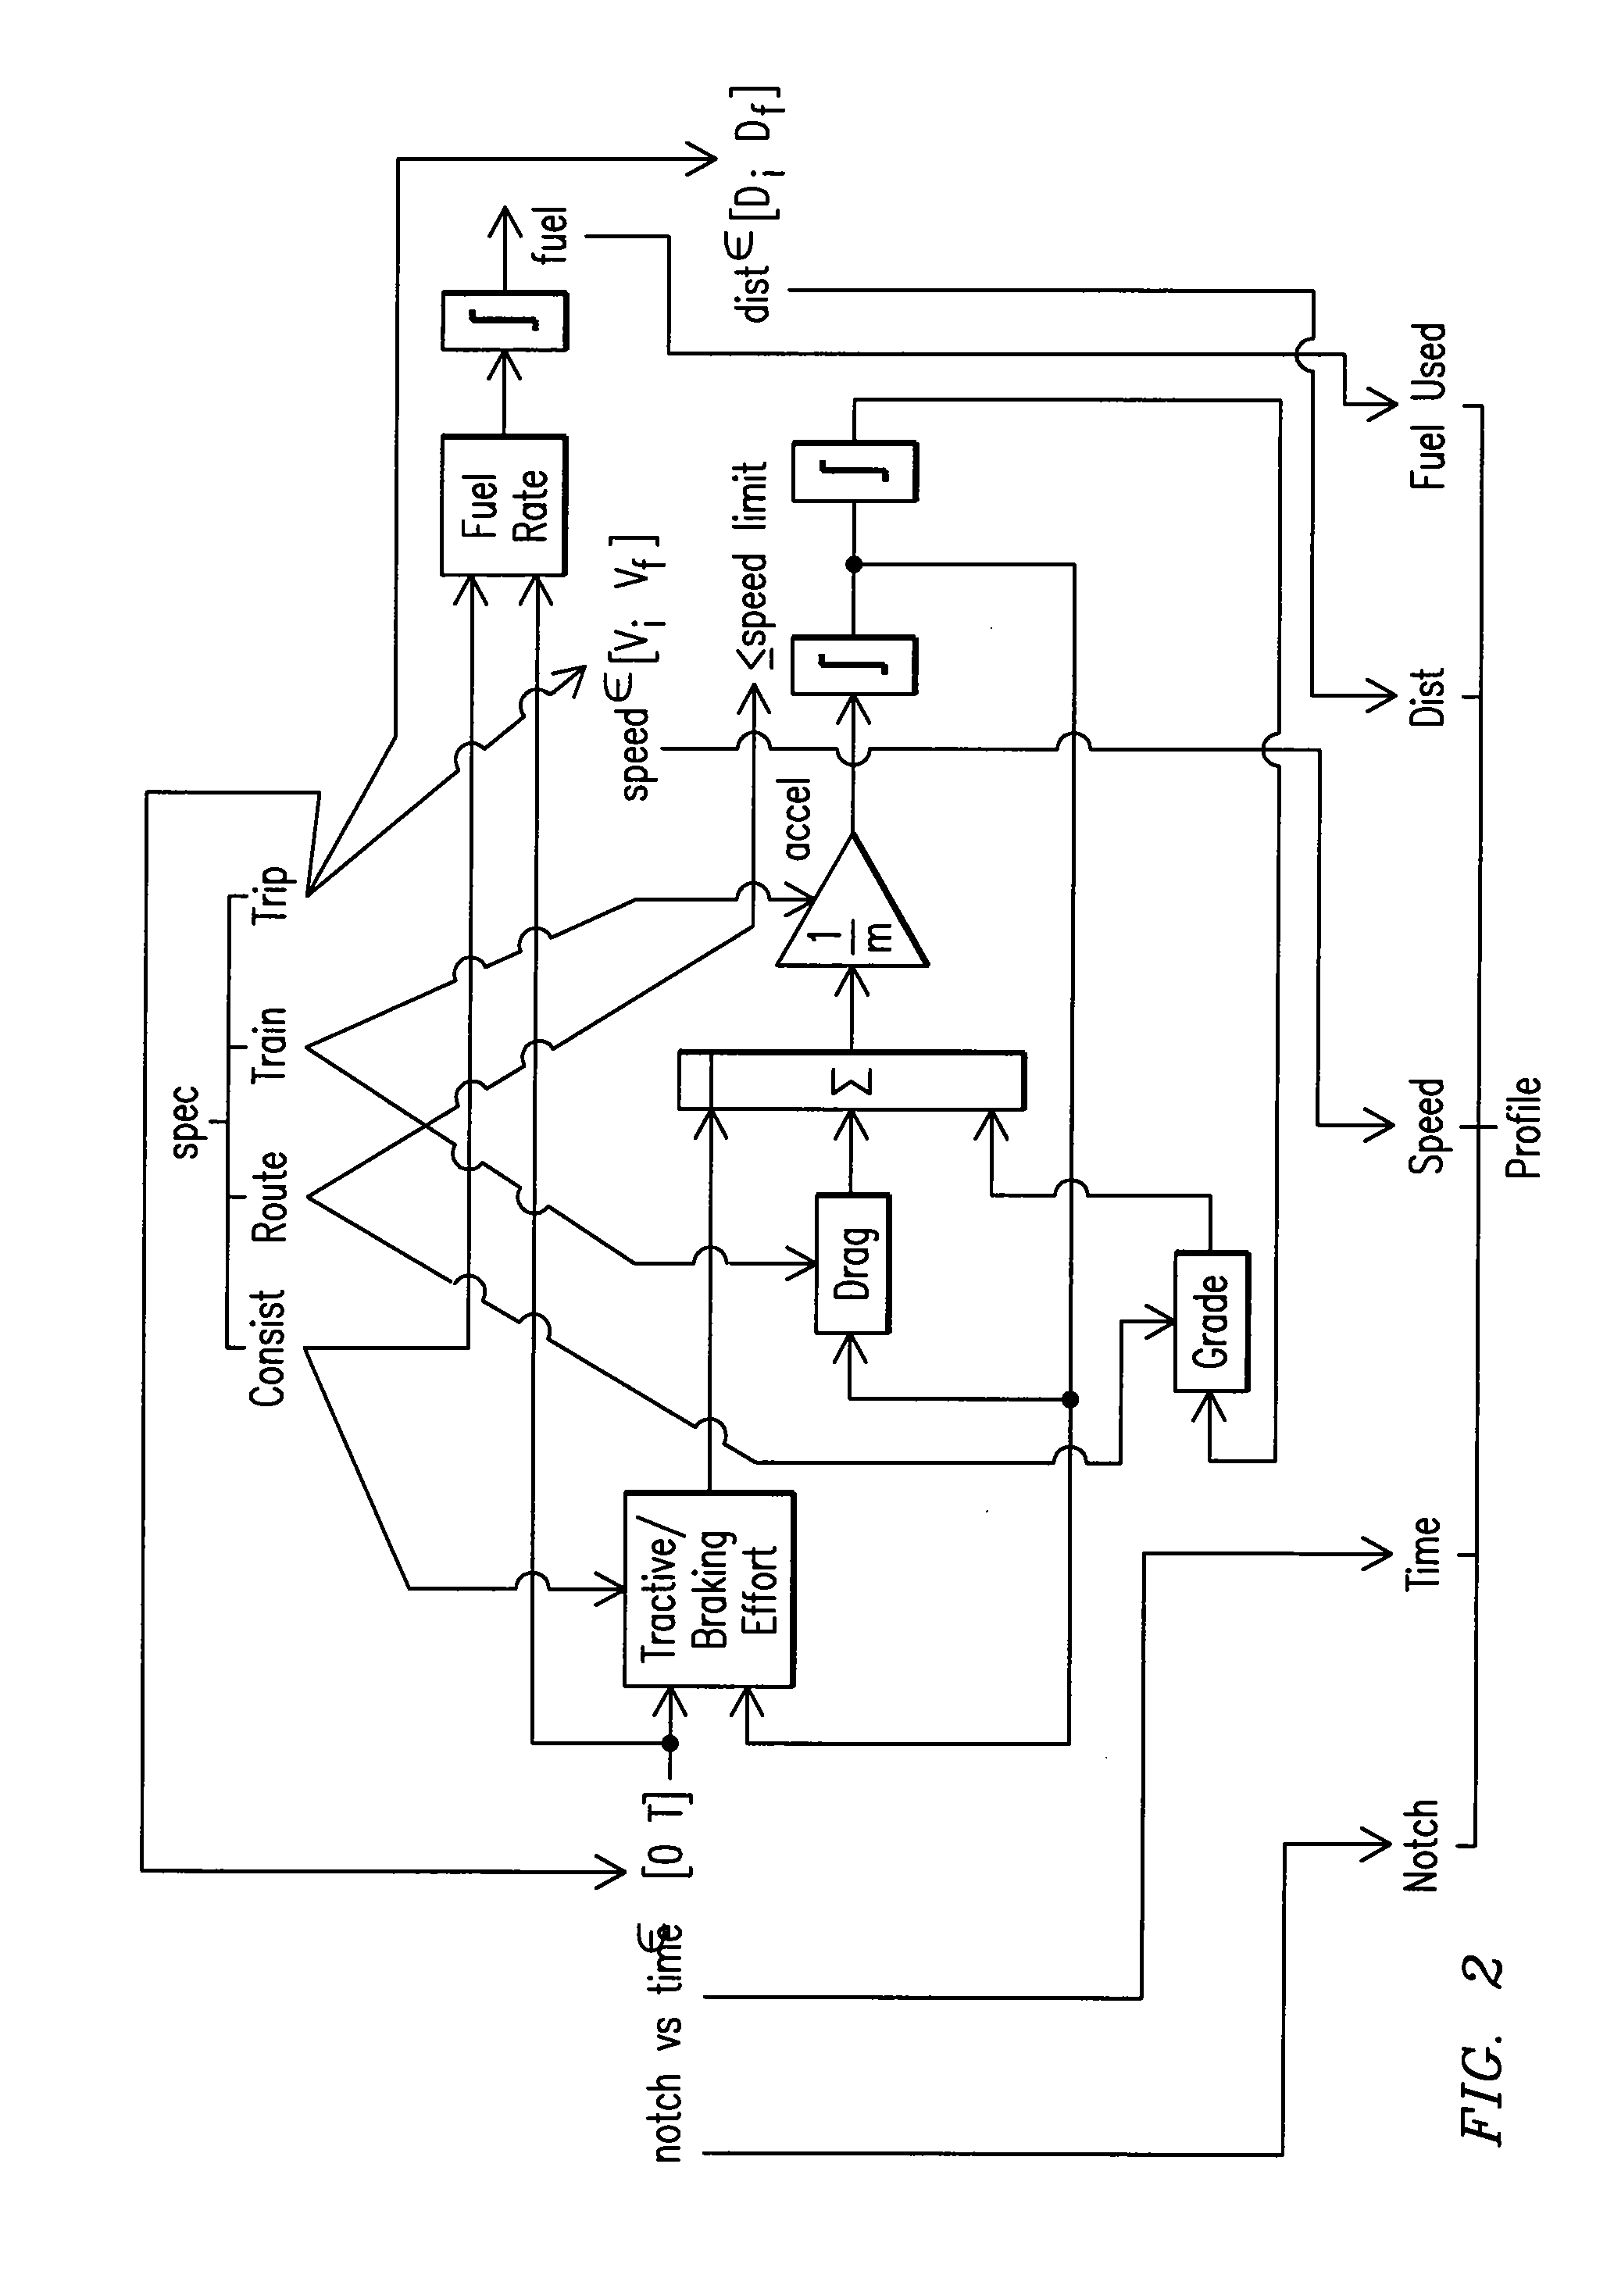 System and Method for Pacing a Plurality of Powered Systems Traveling Along A Route